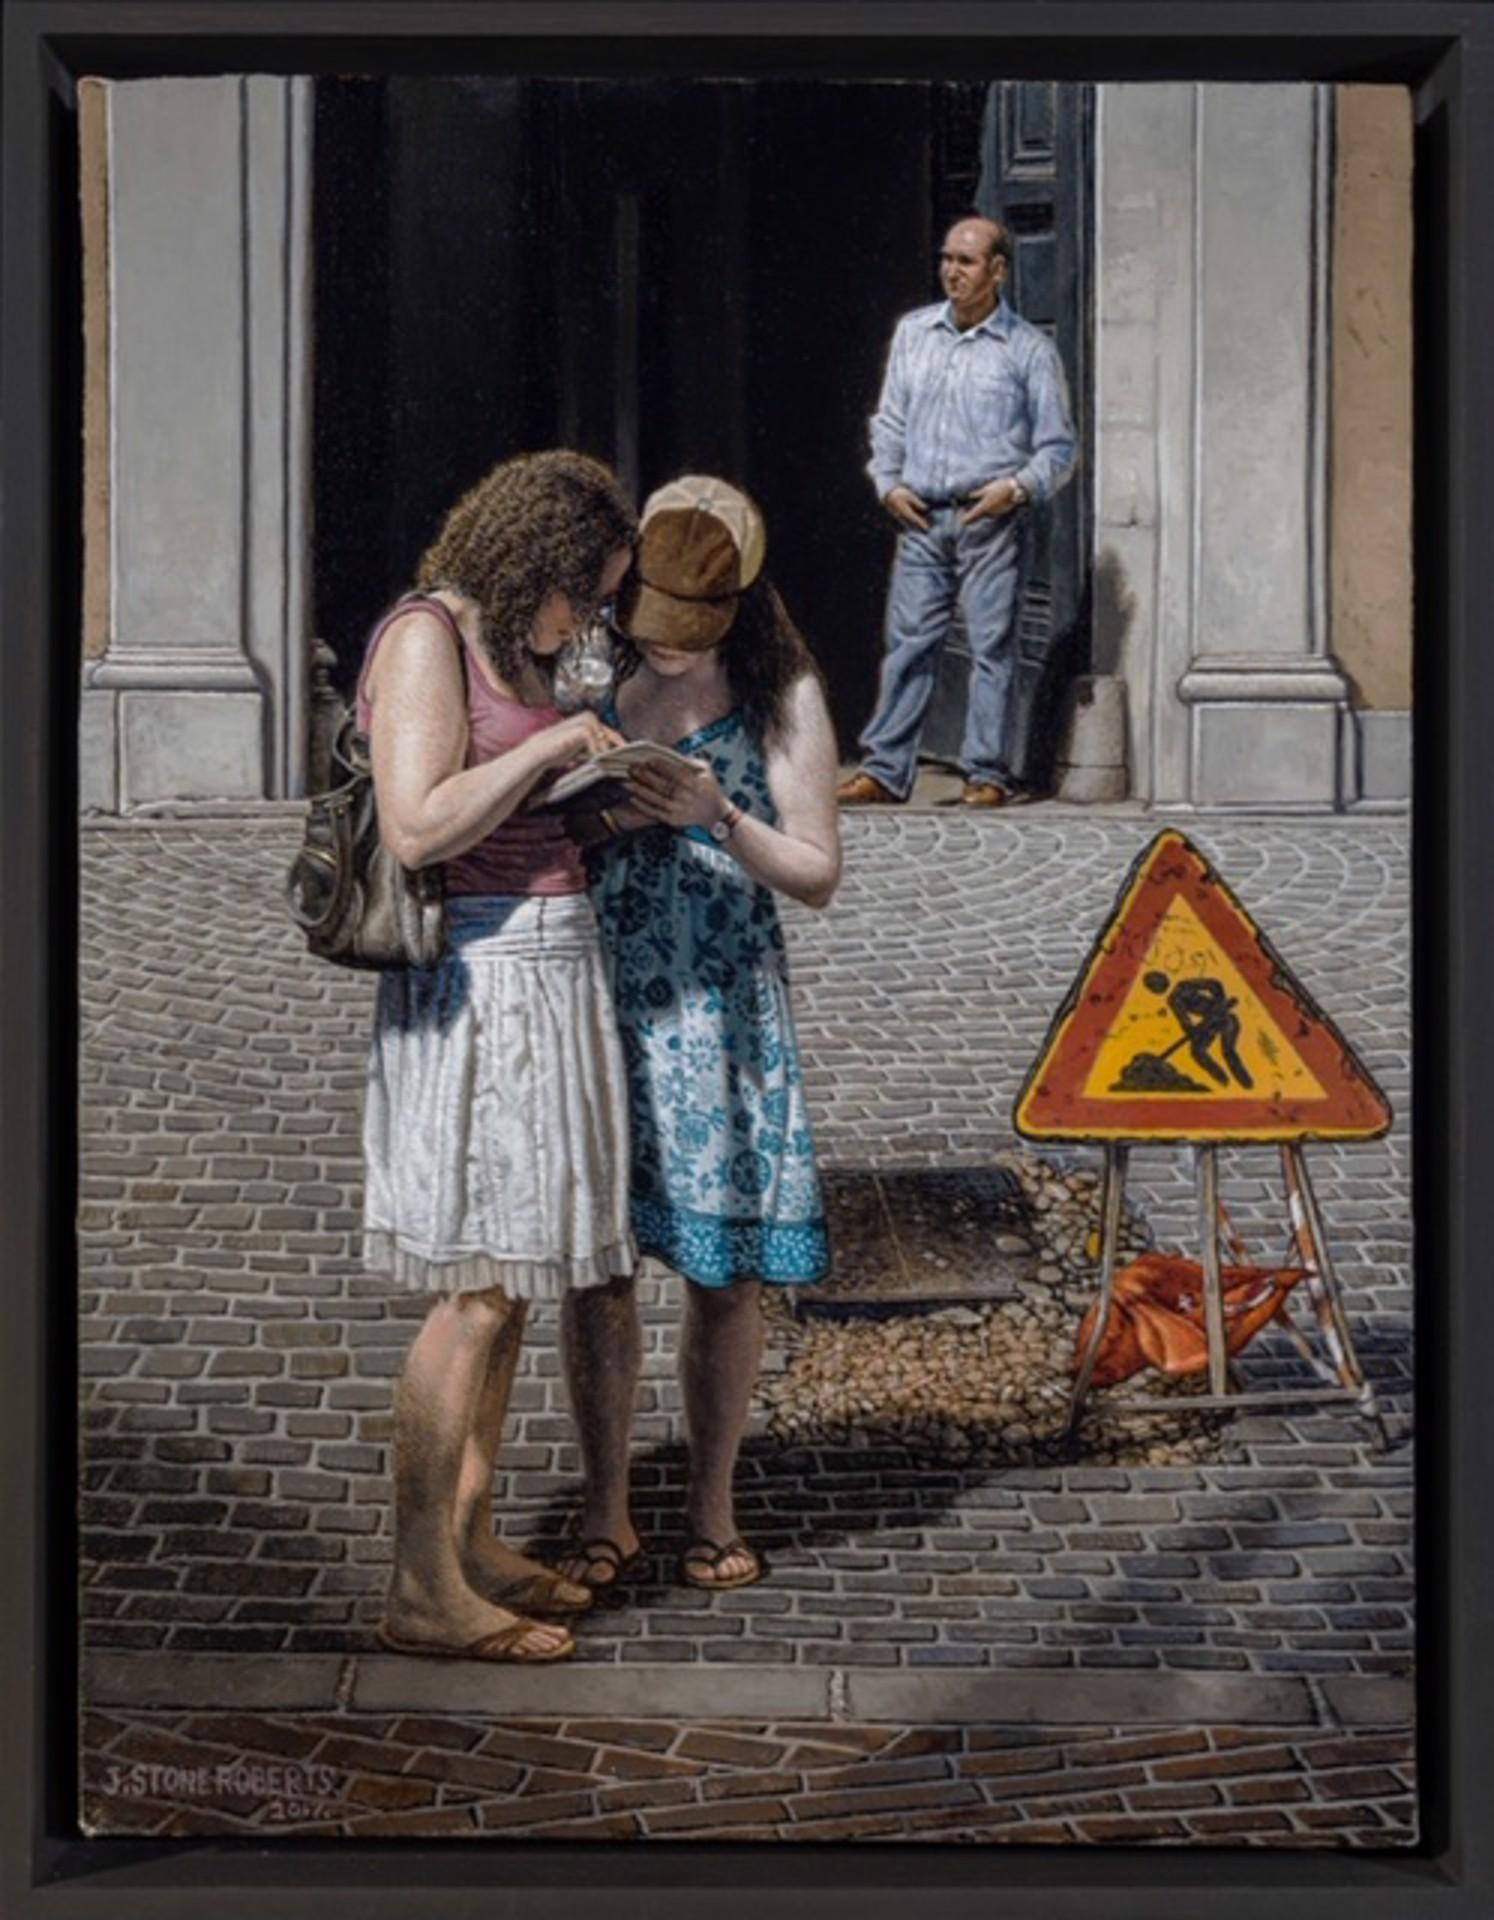 Stone Roberts Figurative Painting - Rome, Italy realistic figurative cityscape of two girls and man on Roman street